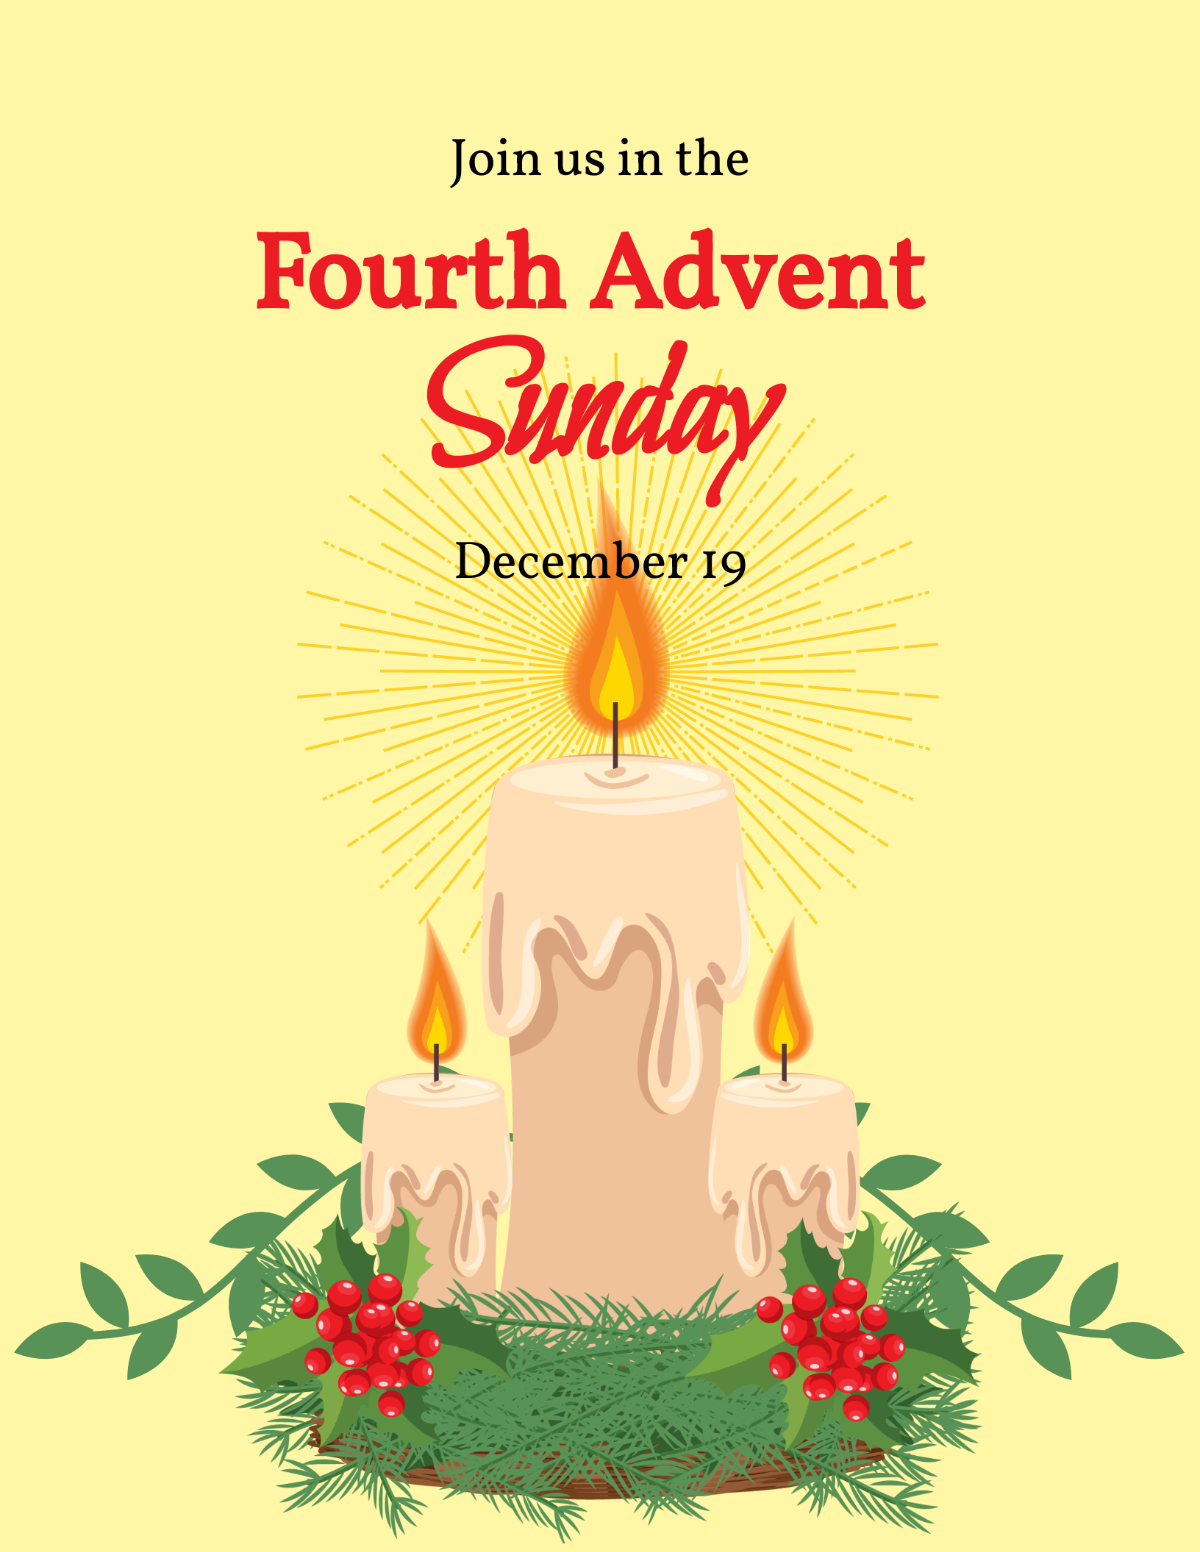 Fourth Advent Sunday Flyer Template